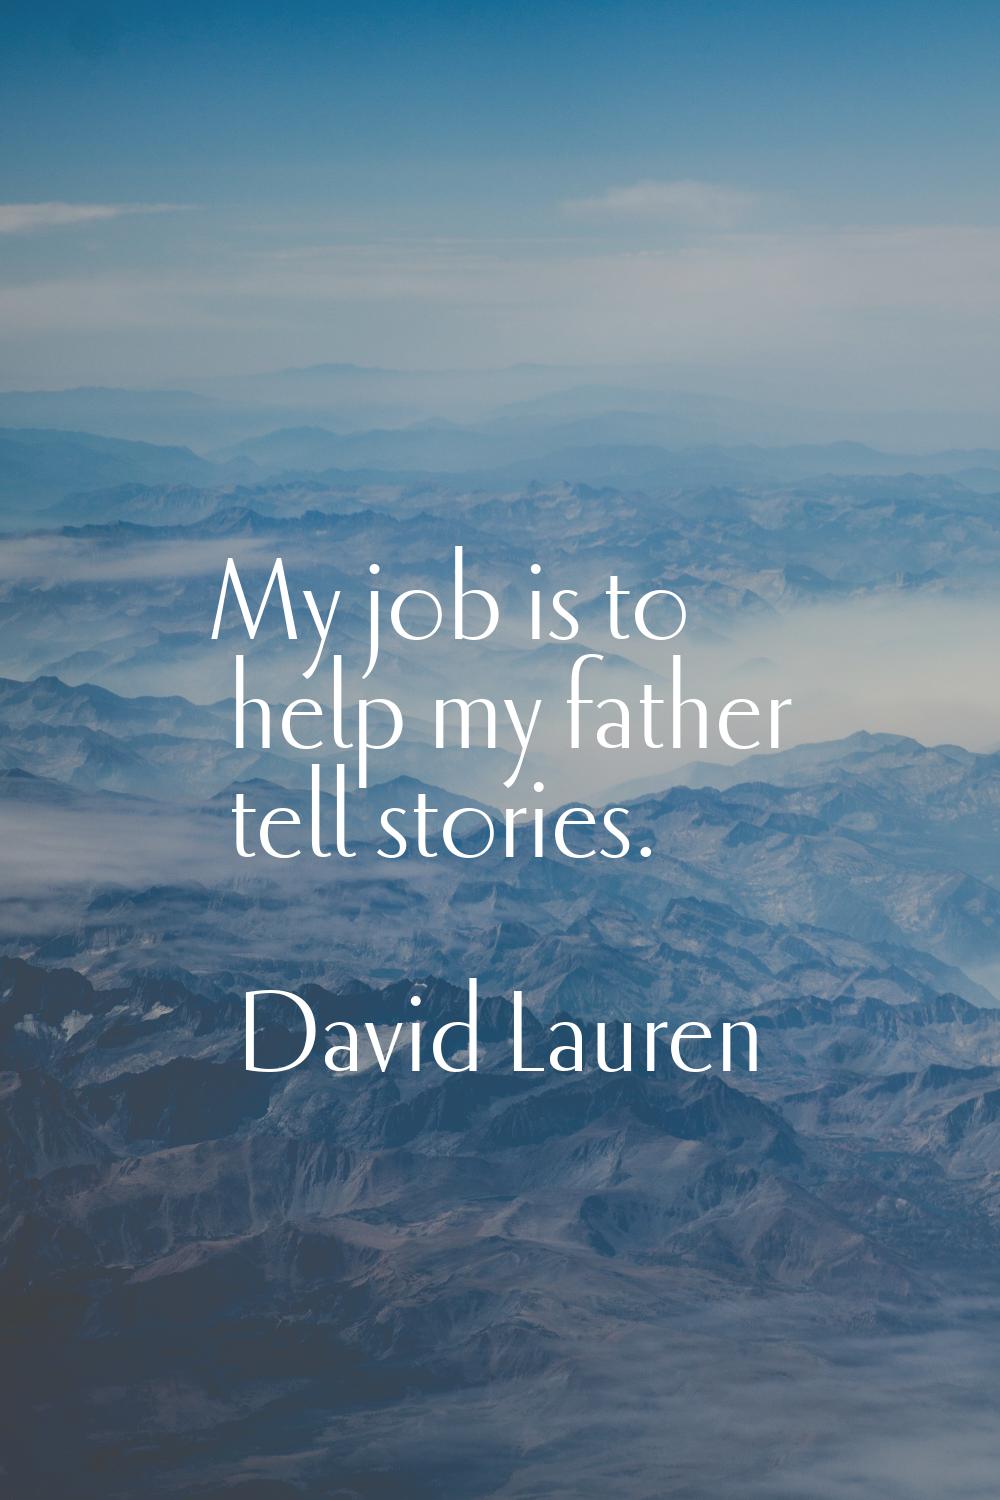 My job is to help my father tell stories.